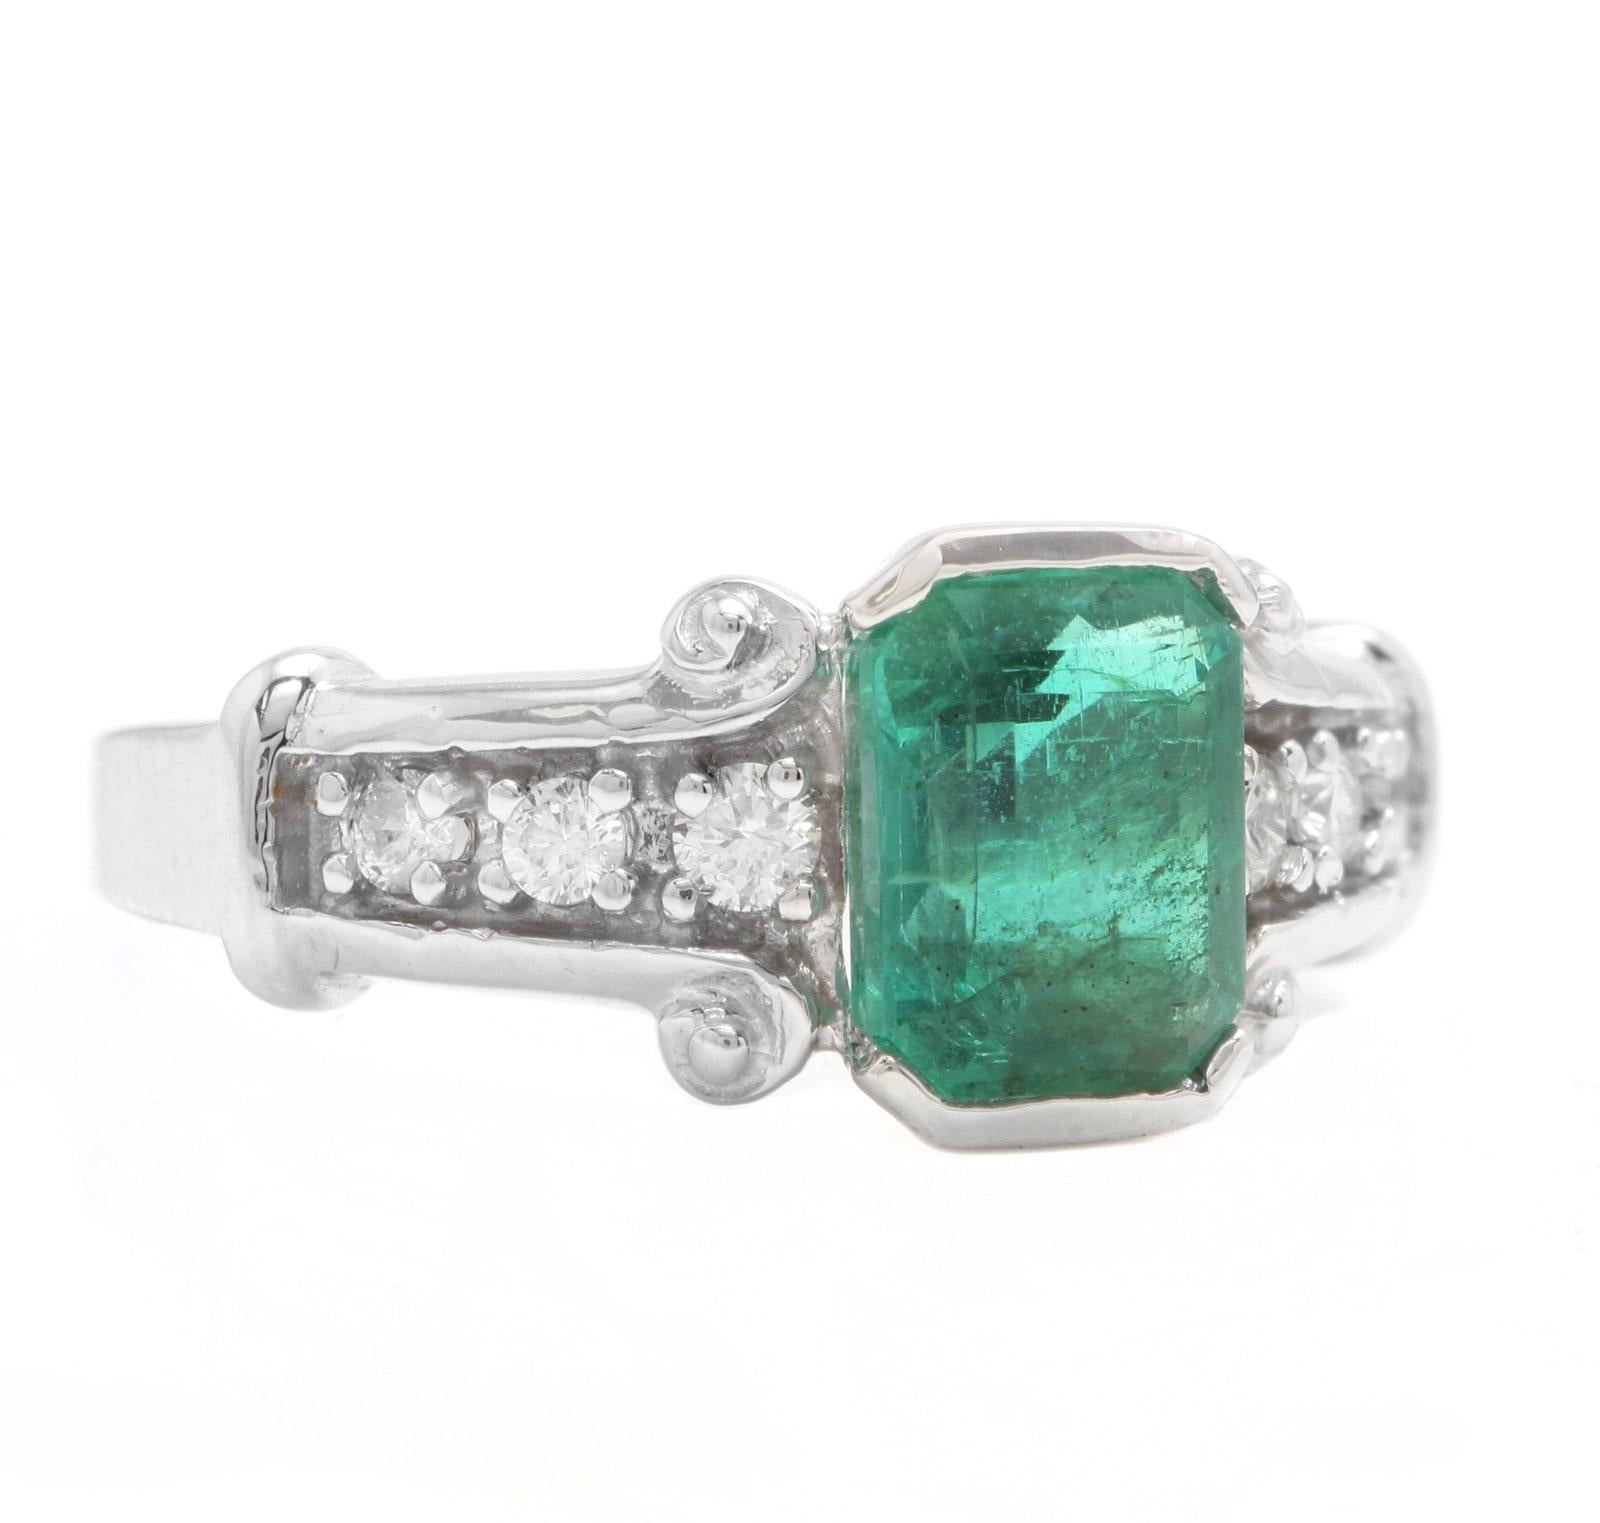 2.25 Carats Natural Emerald and Diamond 14K Solid White Gold Ring

Total Natural Green Emerald Weight is: Approx. 2.00 Carats (transparent)

Emerald Measures: Approx. 8.20 x 6.20mm

Natural Round Diamonds Weight: Approx.  0.25 Carats (color G-H /